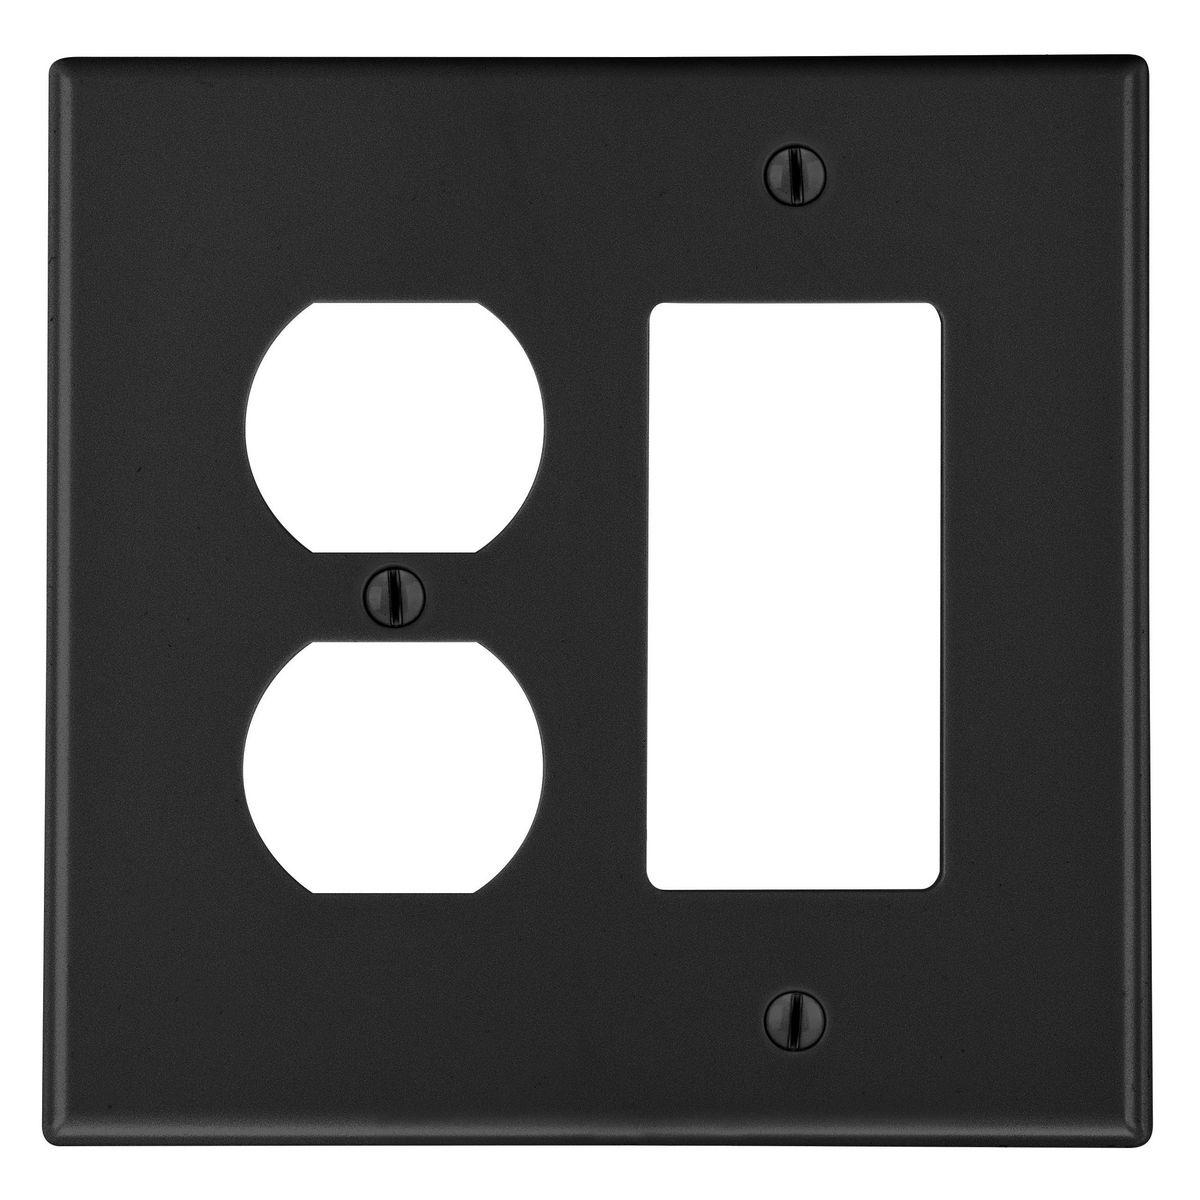 Hubbell P826BK Wallplate, 2-Gang,  1) Duplex 1) Decorator, Black  ; High-impact, self-extinguishing polycarbonate material ; More Rigid ; Sharp lines and less dimpling ; Smooth satin finish ; Blends into wall with an optimum finish ; Smooth Satin Finish